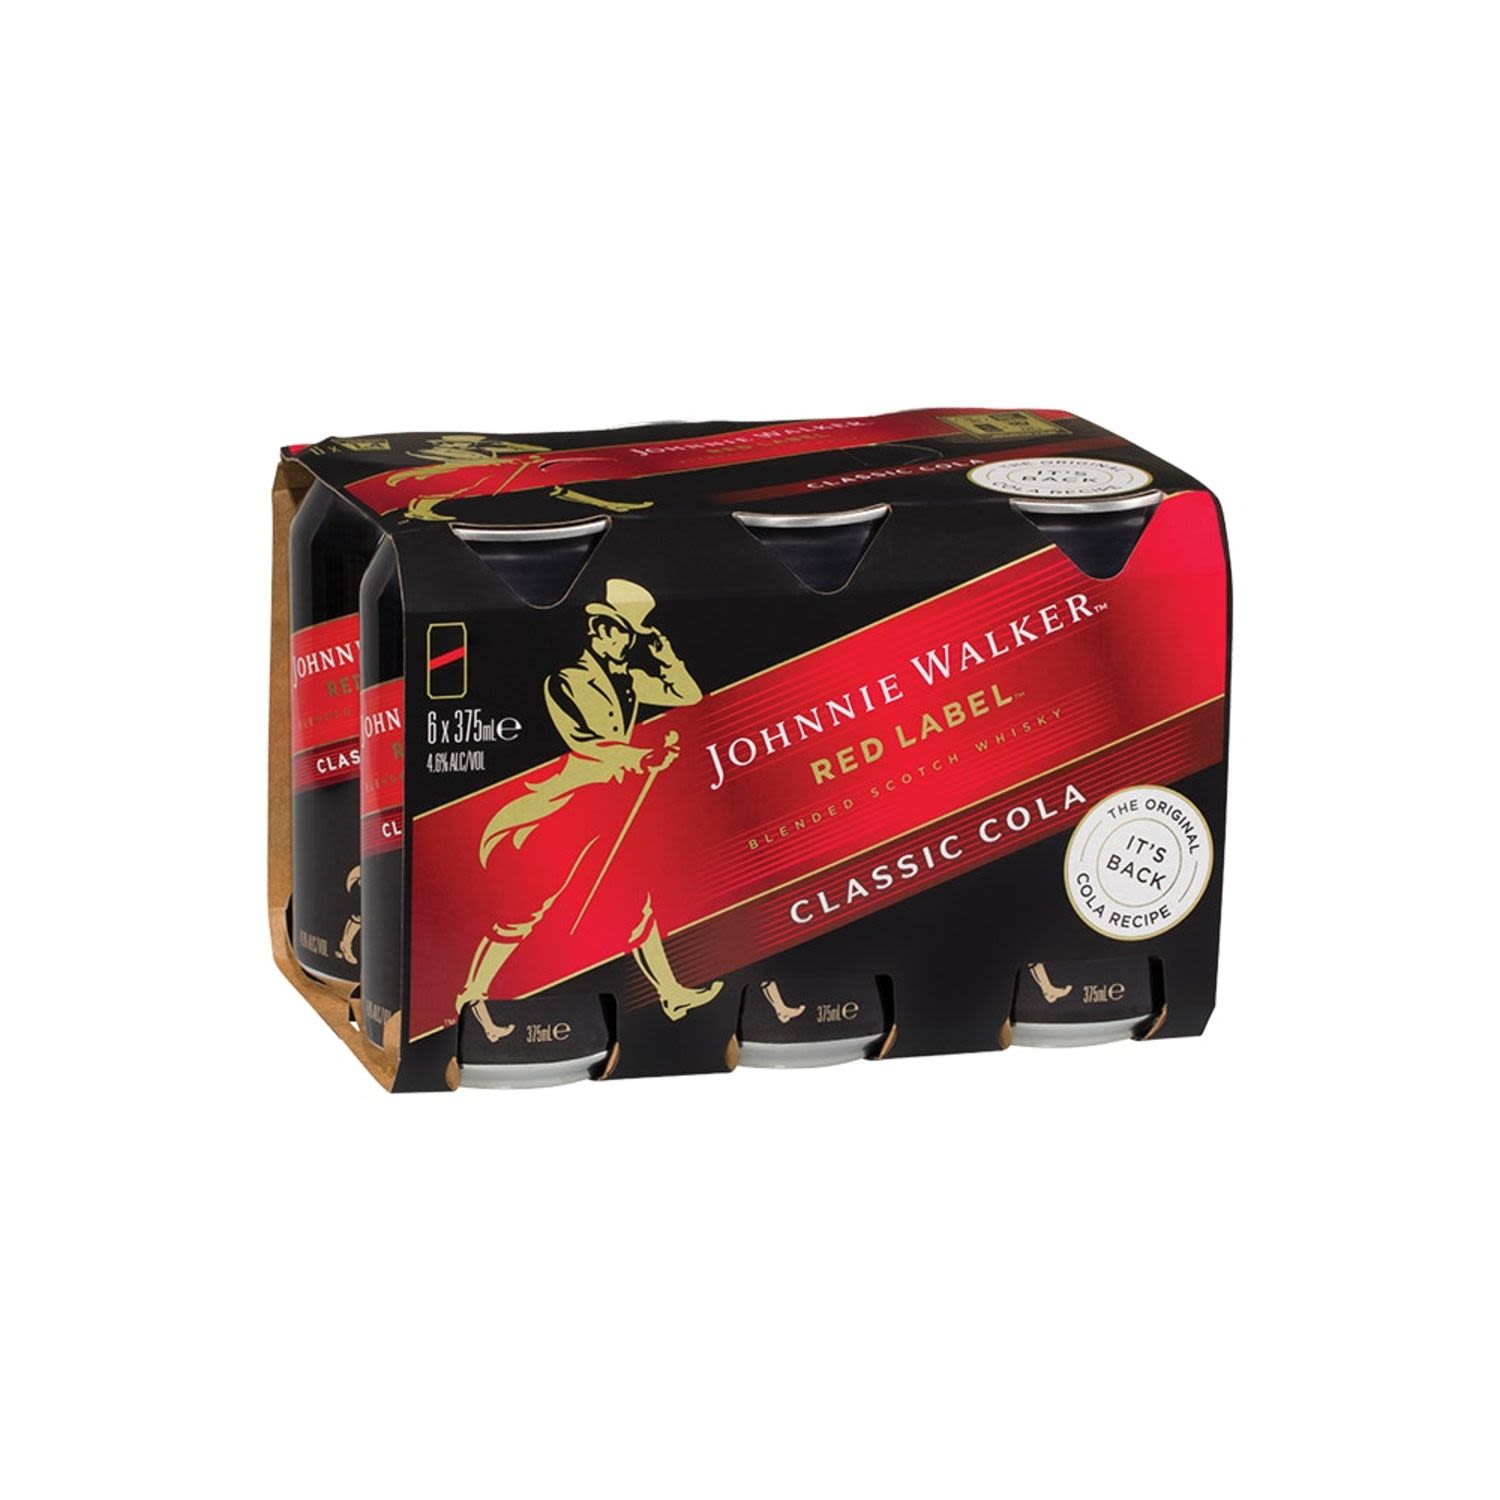 Johnnie Walker Red Label & Cola 4.6% Can 375mL 6 Pack